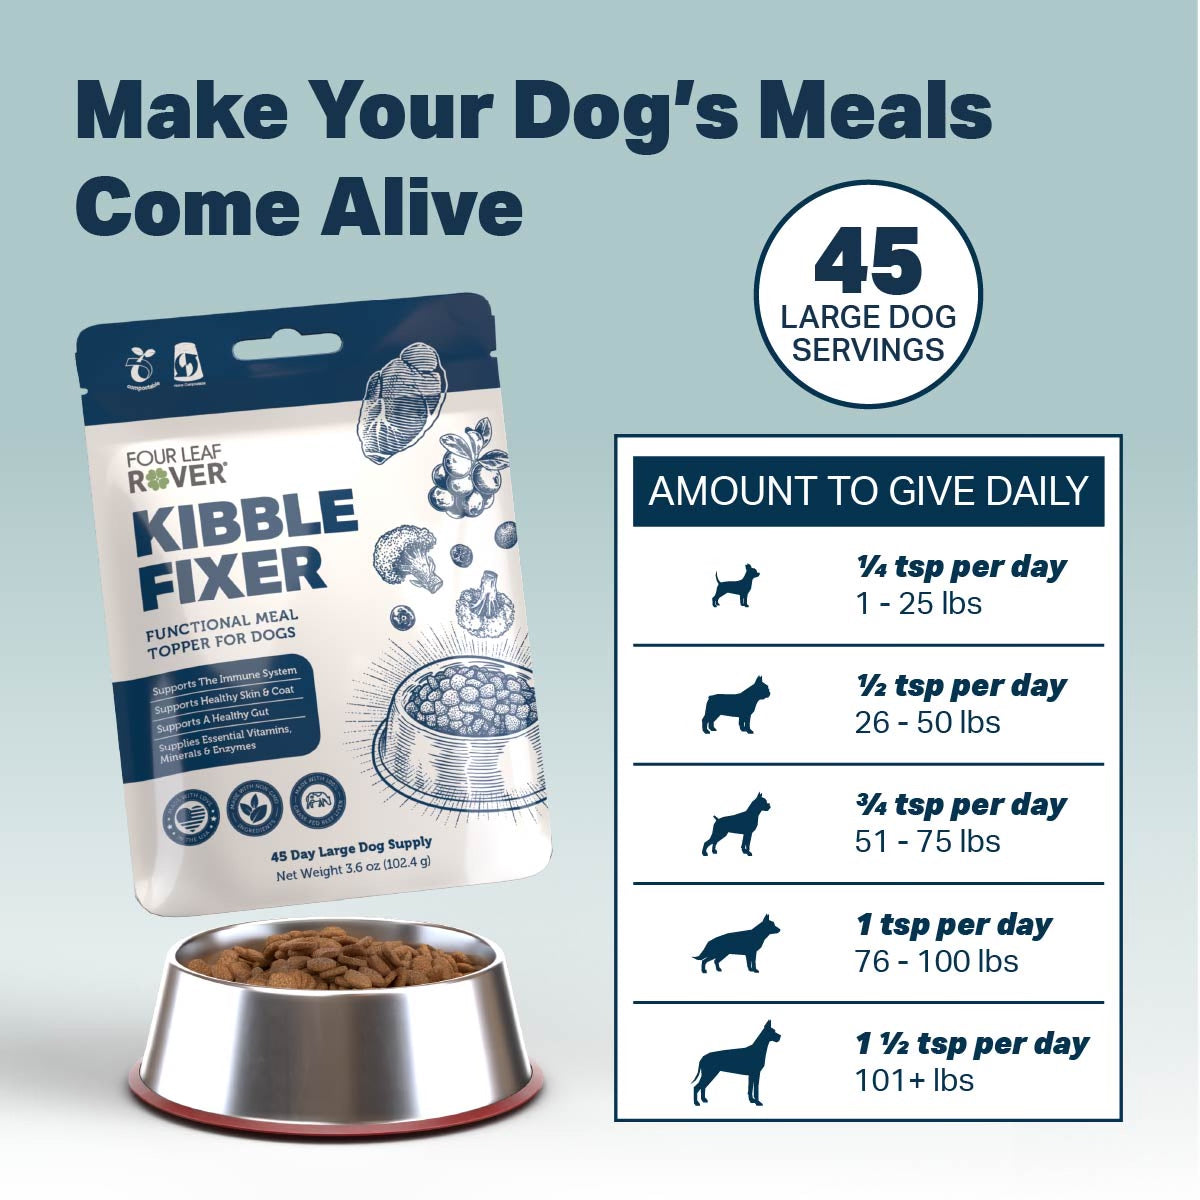 Make Your Dog's Meals Come Alive 45 LARGE DOG SERVINGS AMOUNT TO GIVE DAILY 1/4 tsp per day 1 - 25 lbs 1/2 tsp per day 26-50 lbs 3/4 tsp per day 51 - 75 lbs 1 tsp per day 76 - 100 lbs 1 1/2 tsp per day 101+ lbs